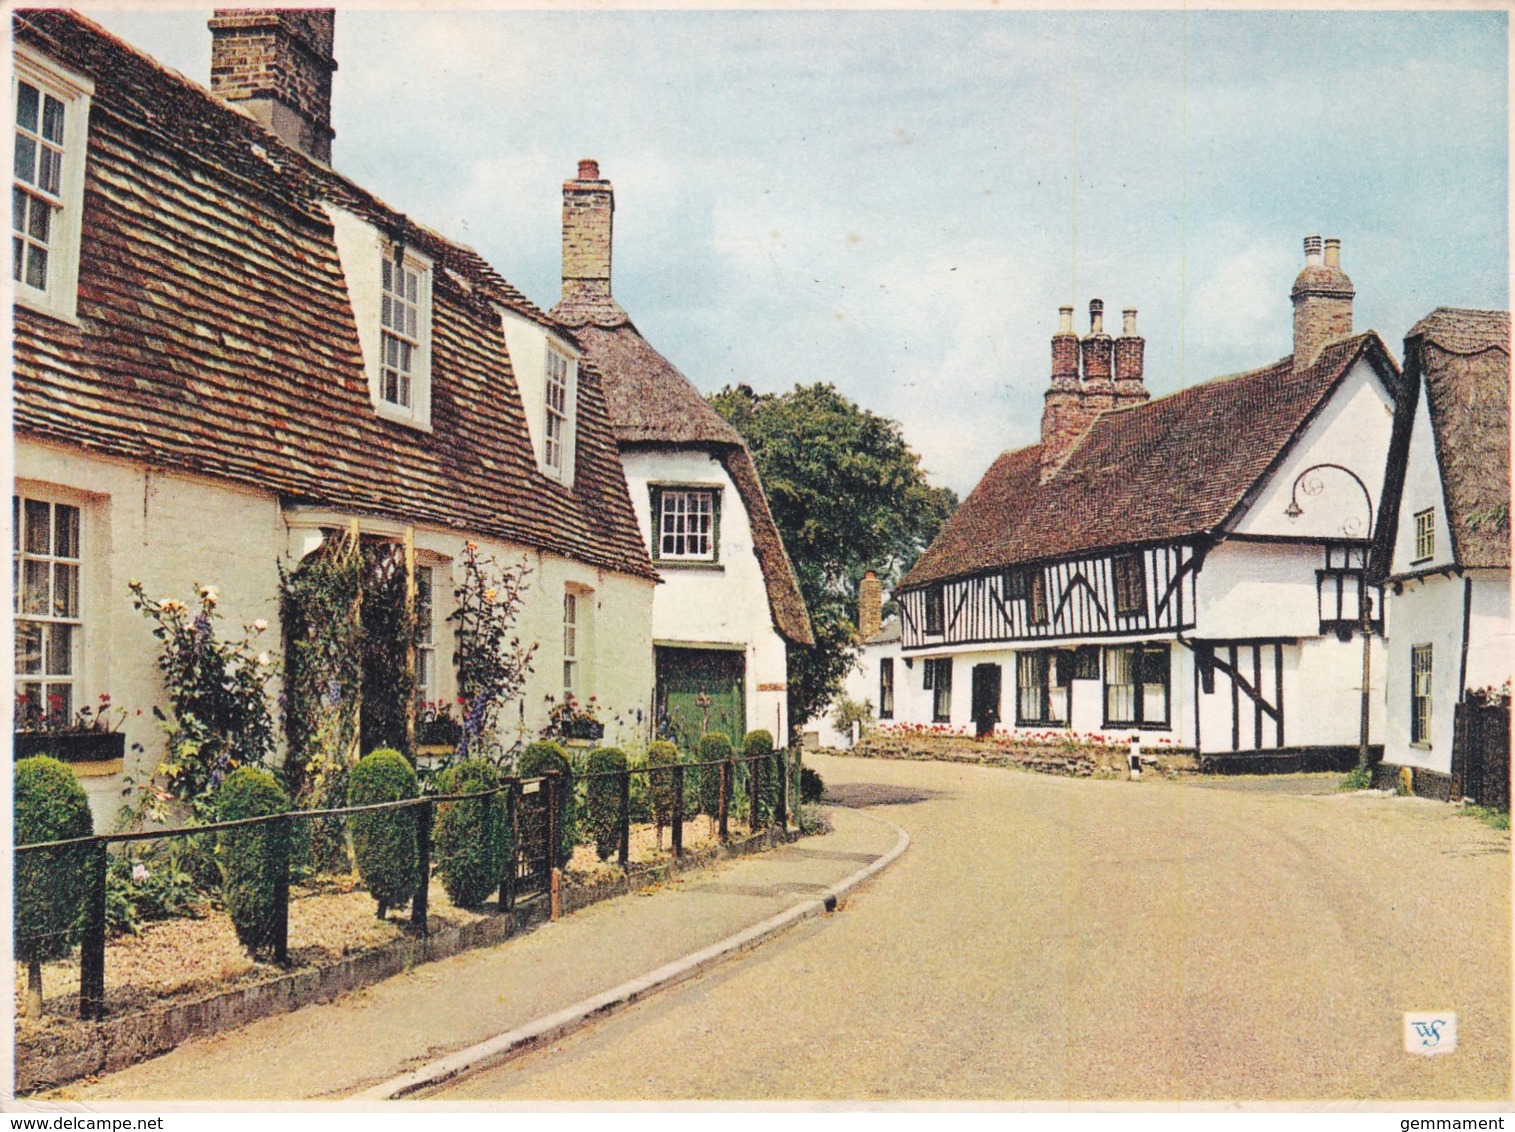 HOUGHTON - THATCHED COTTAGES - Huntingdonshire